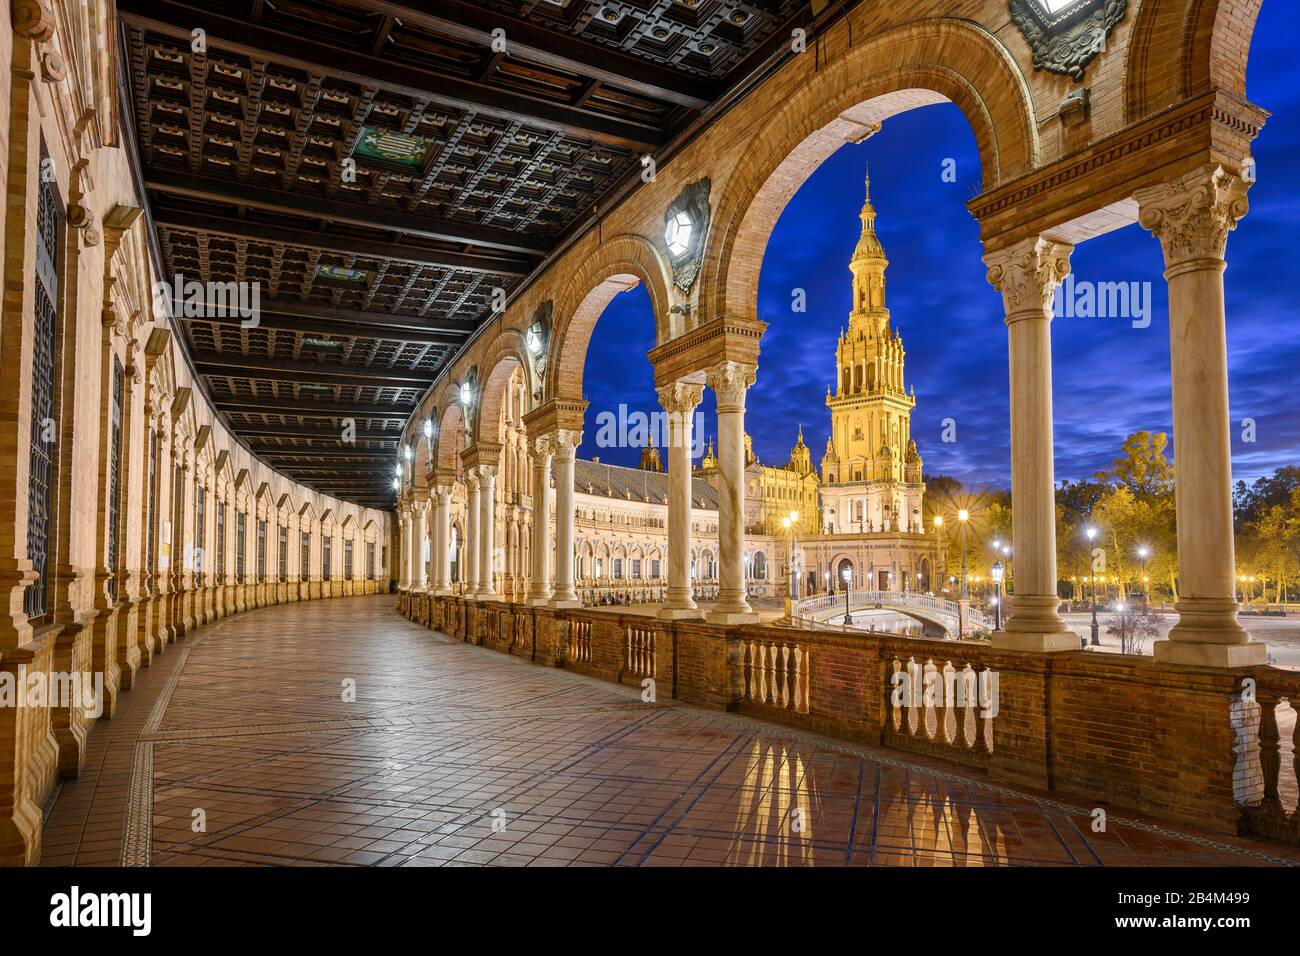 Plaza de Espana in Seville, Andalusia, Spain at night Stock Photo